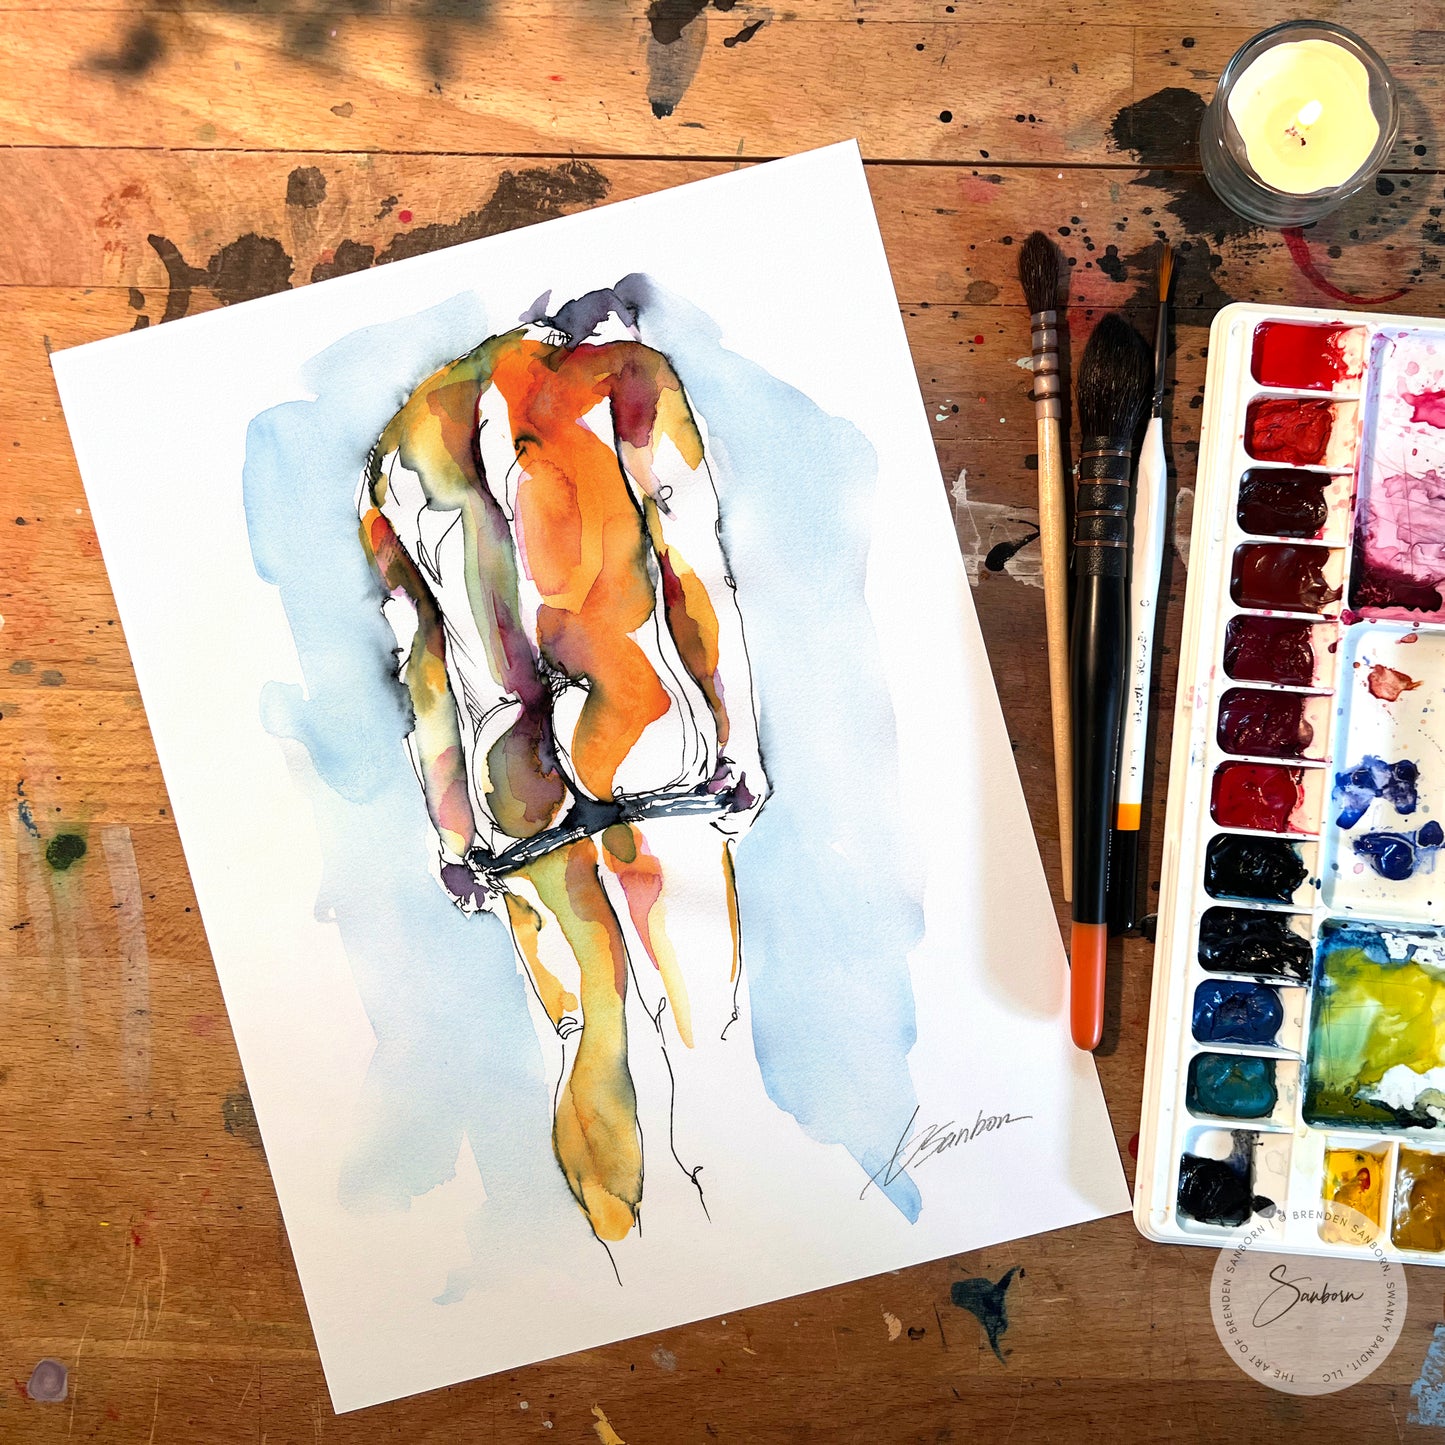 Classical Male Physique in Ink & Watercolor: A Revealing Pose